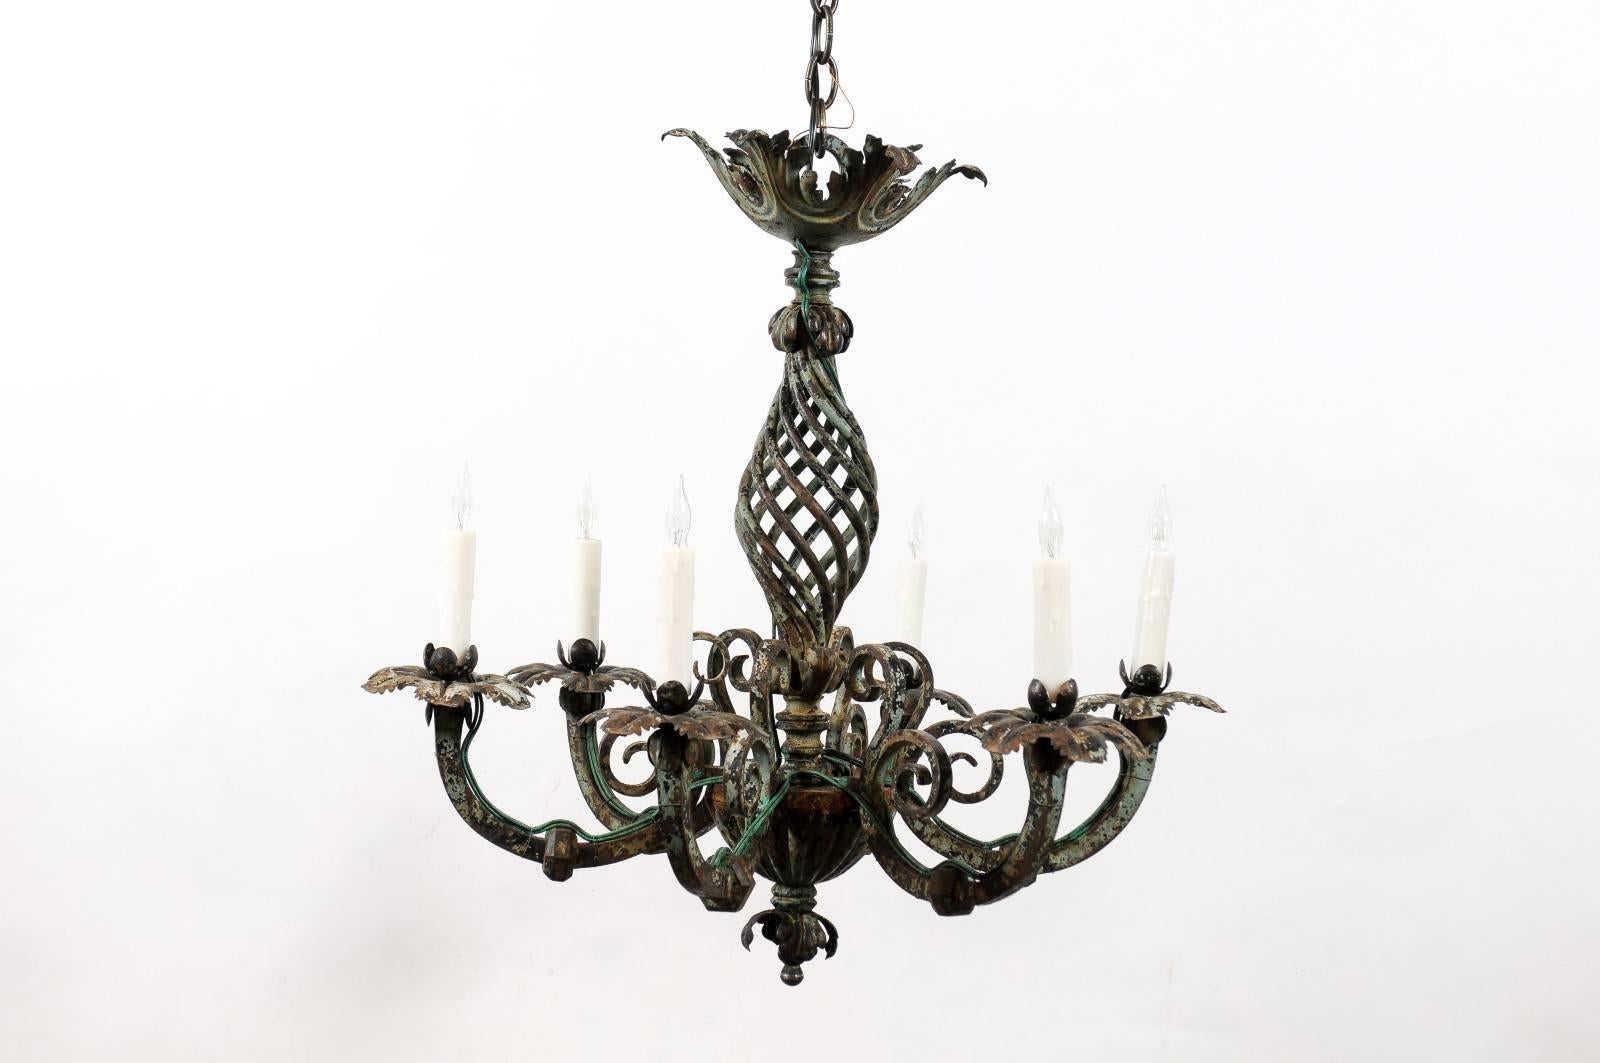 Green painted iron chandelier with scroll detail and six (6) lights, France, circa 1890.